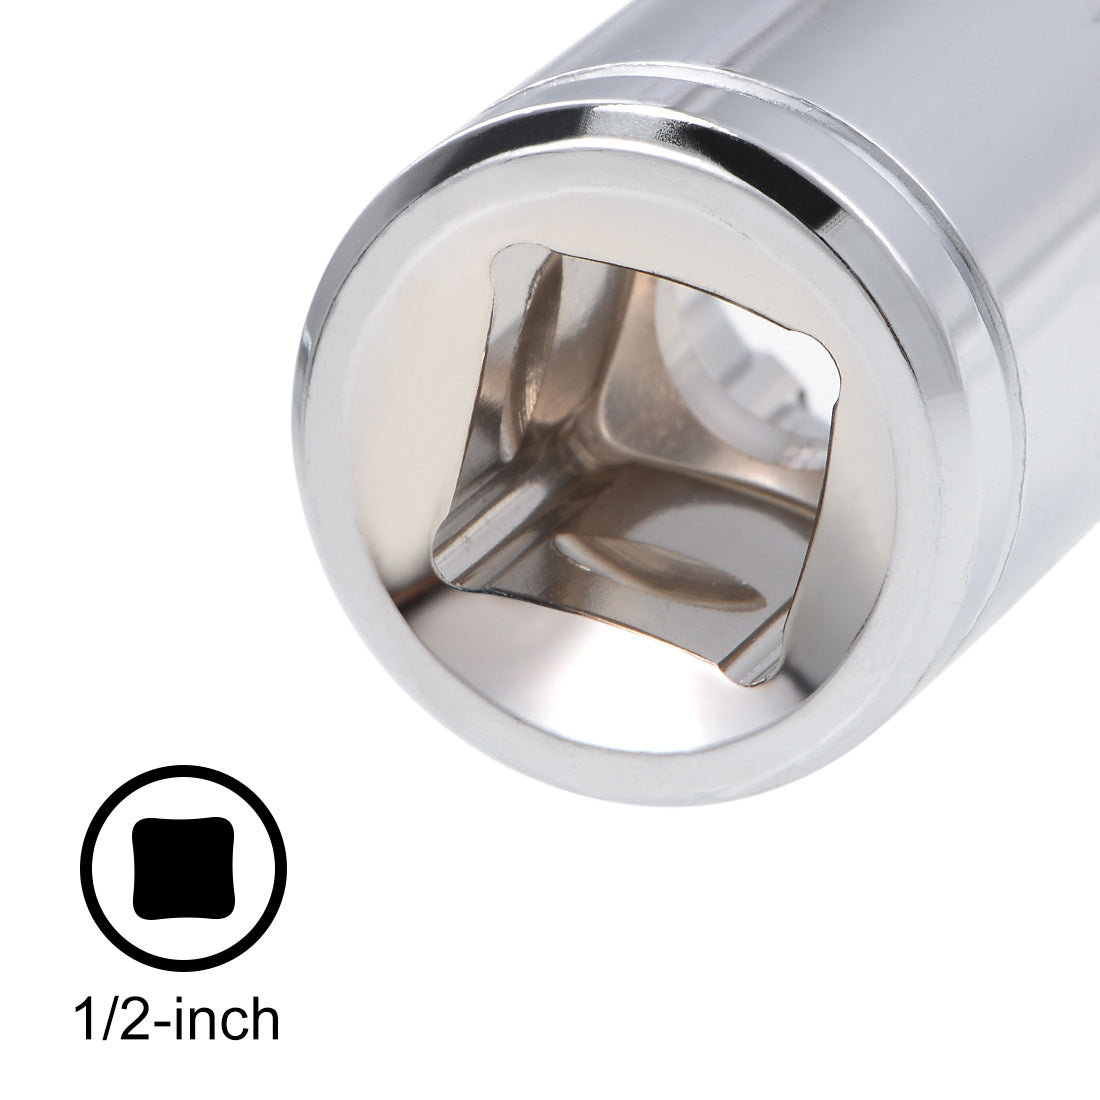 uxcell Uxcell 1/2-inch Drive E18 Universal Spline Socket Shallow 12 Point Cr-V Steel